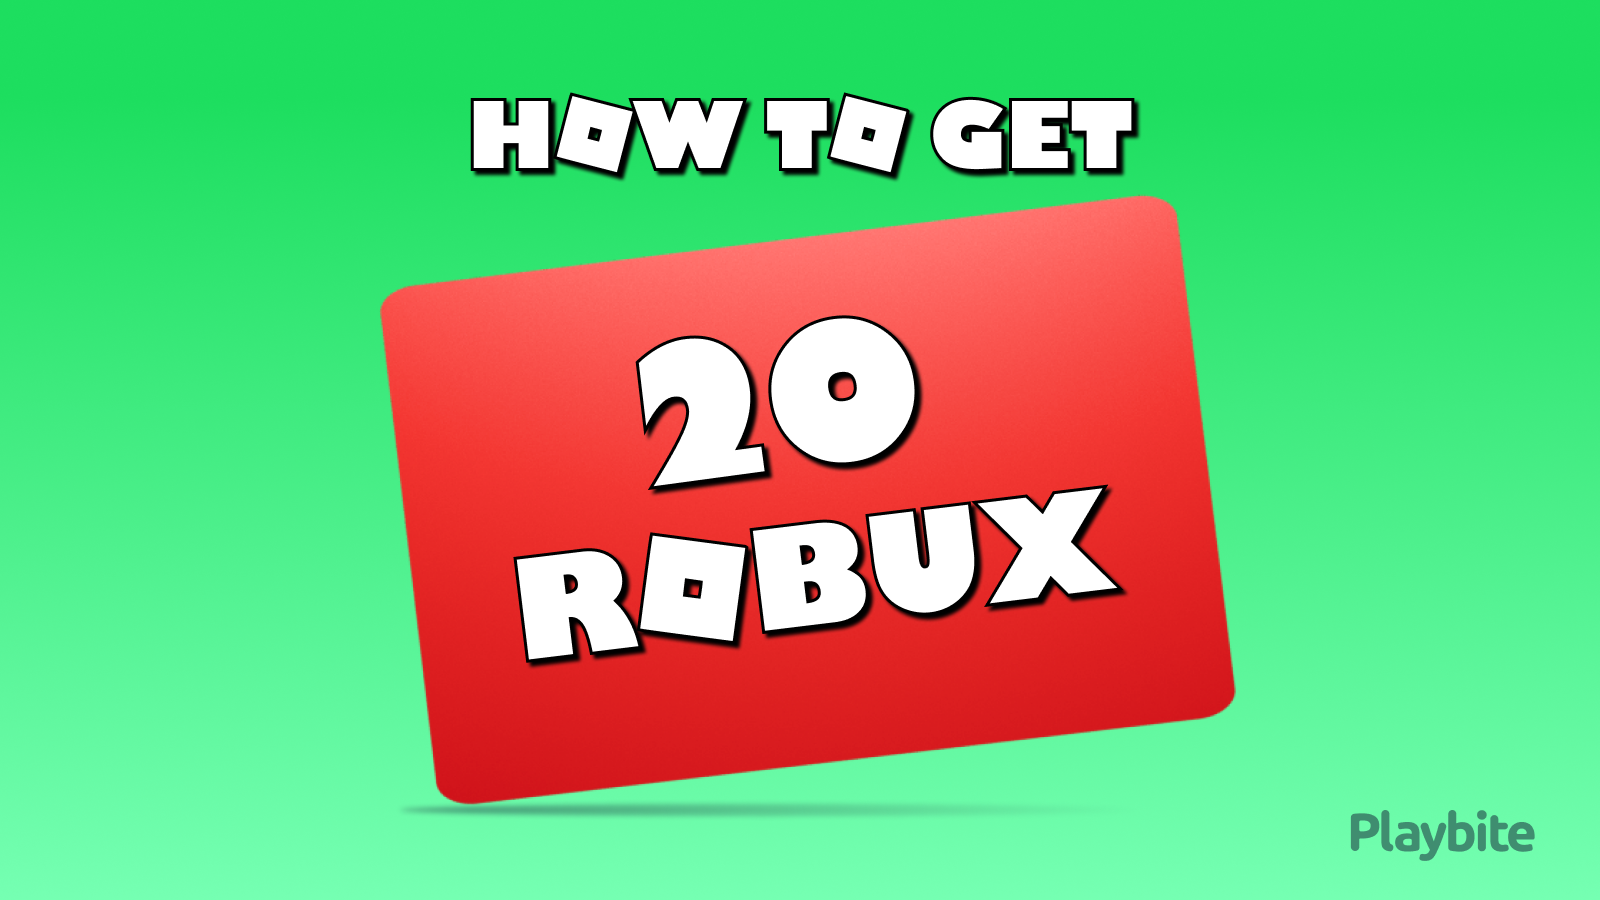 How To Get 20 Robux For Free - Playbite